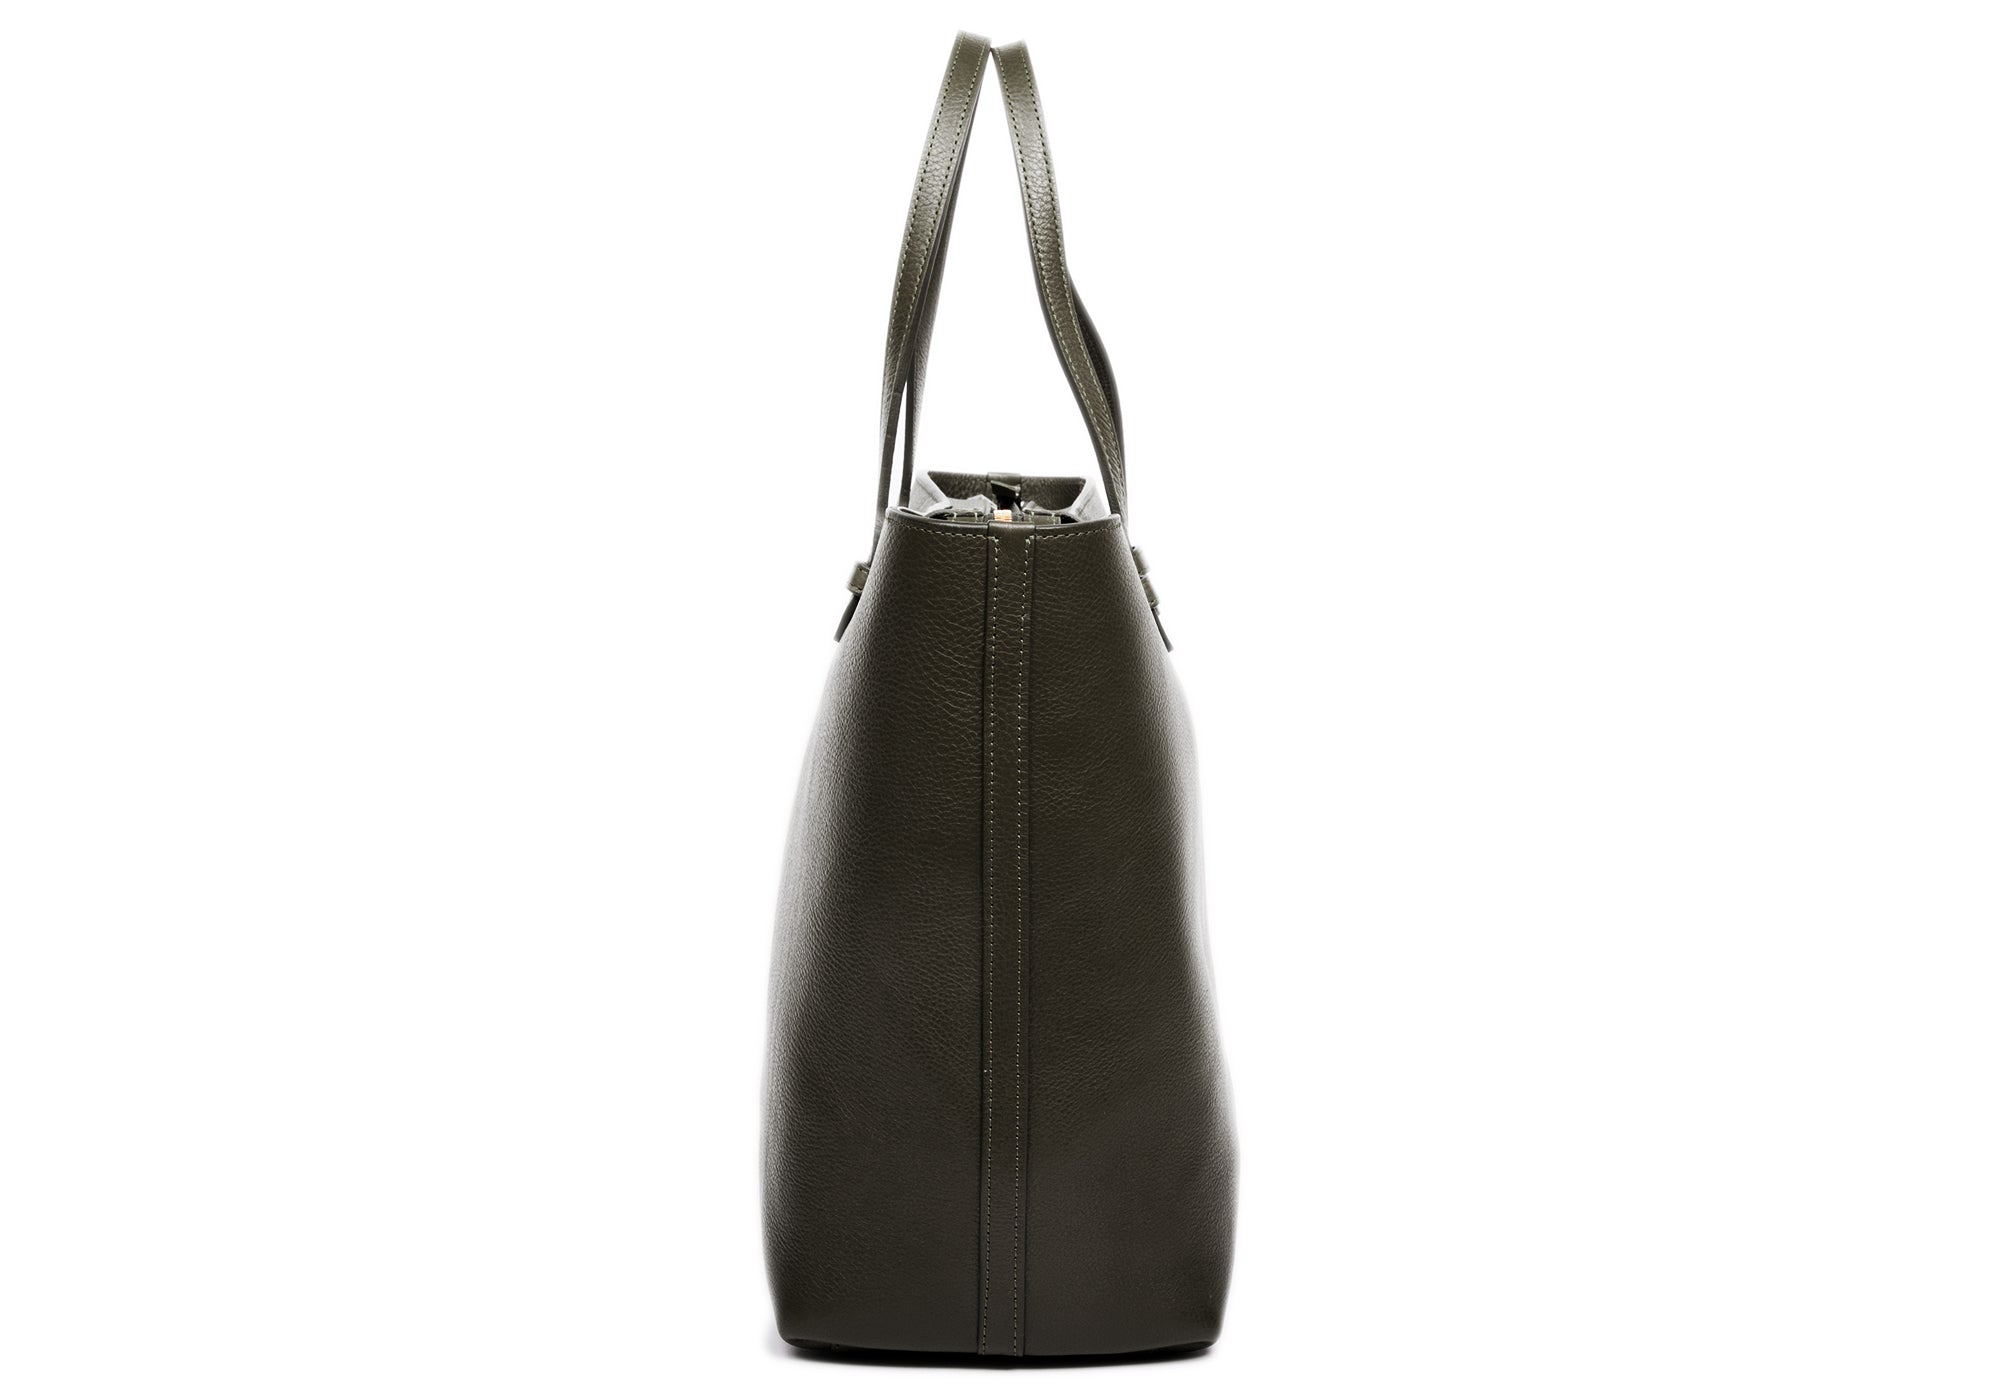 Lola Box Tote in Chestnut – Awl Snap Leather Goods